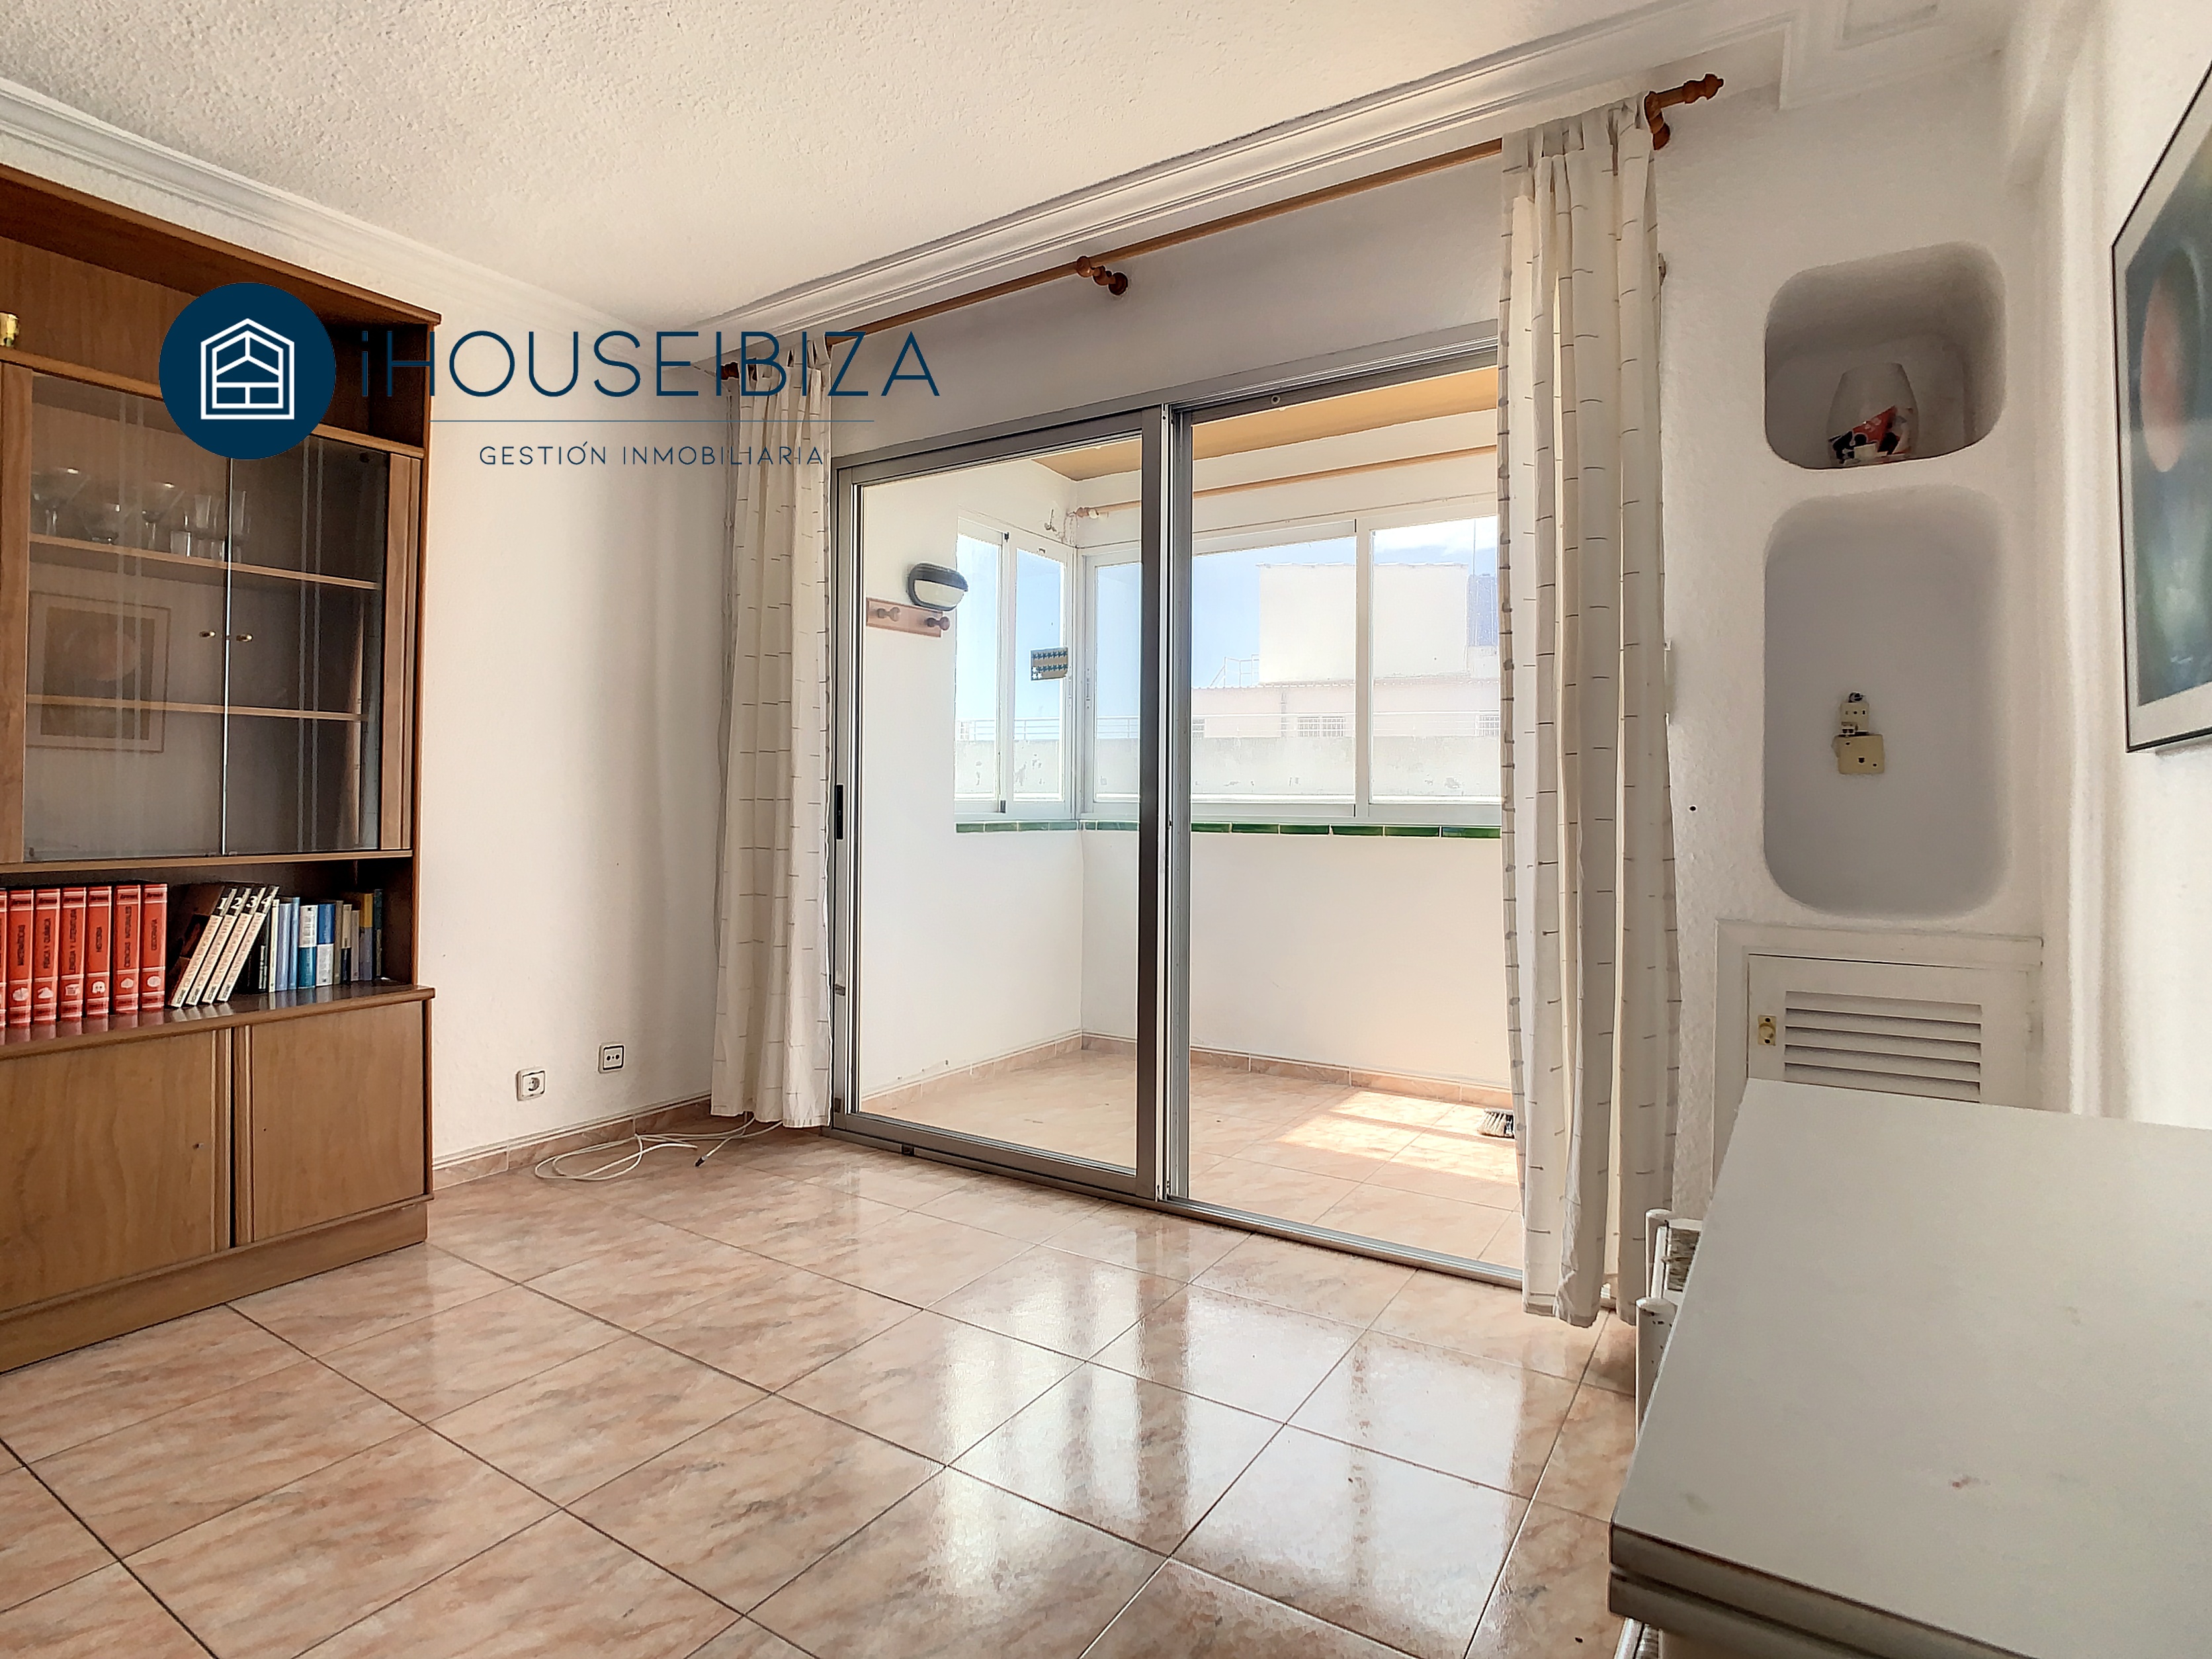 For sale APARTMENT of 69m2 with SEA VIEW